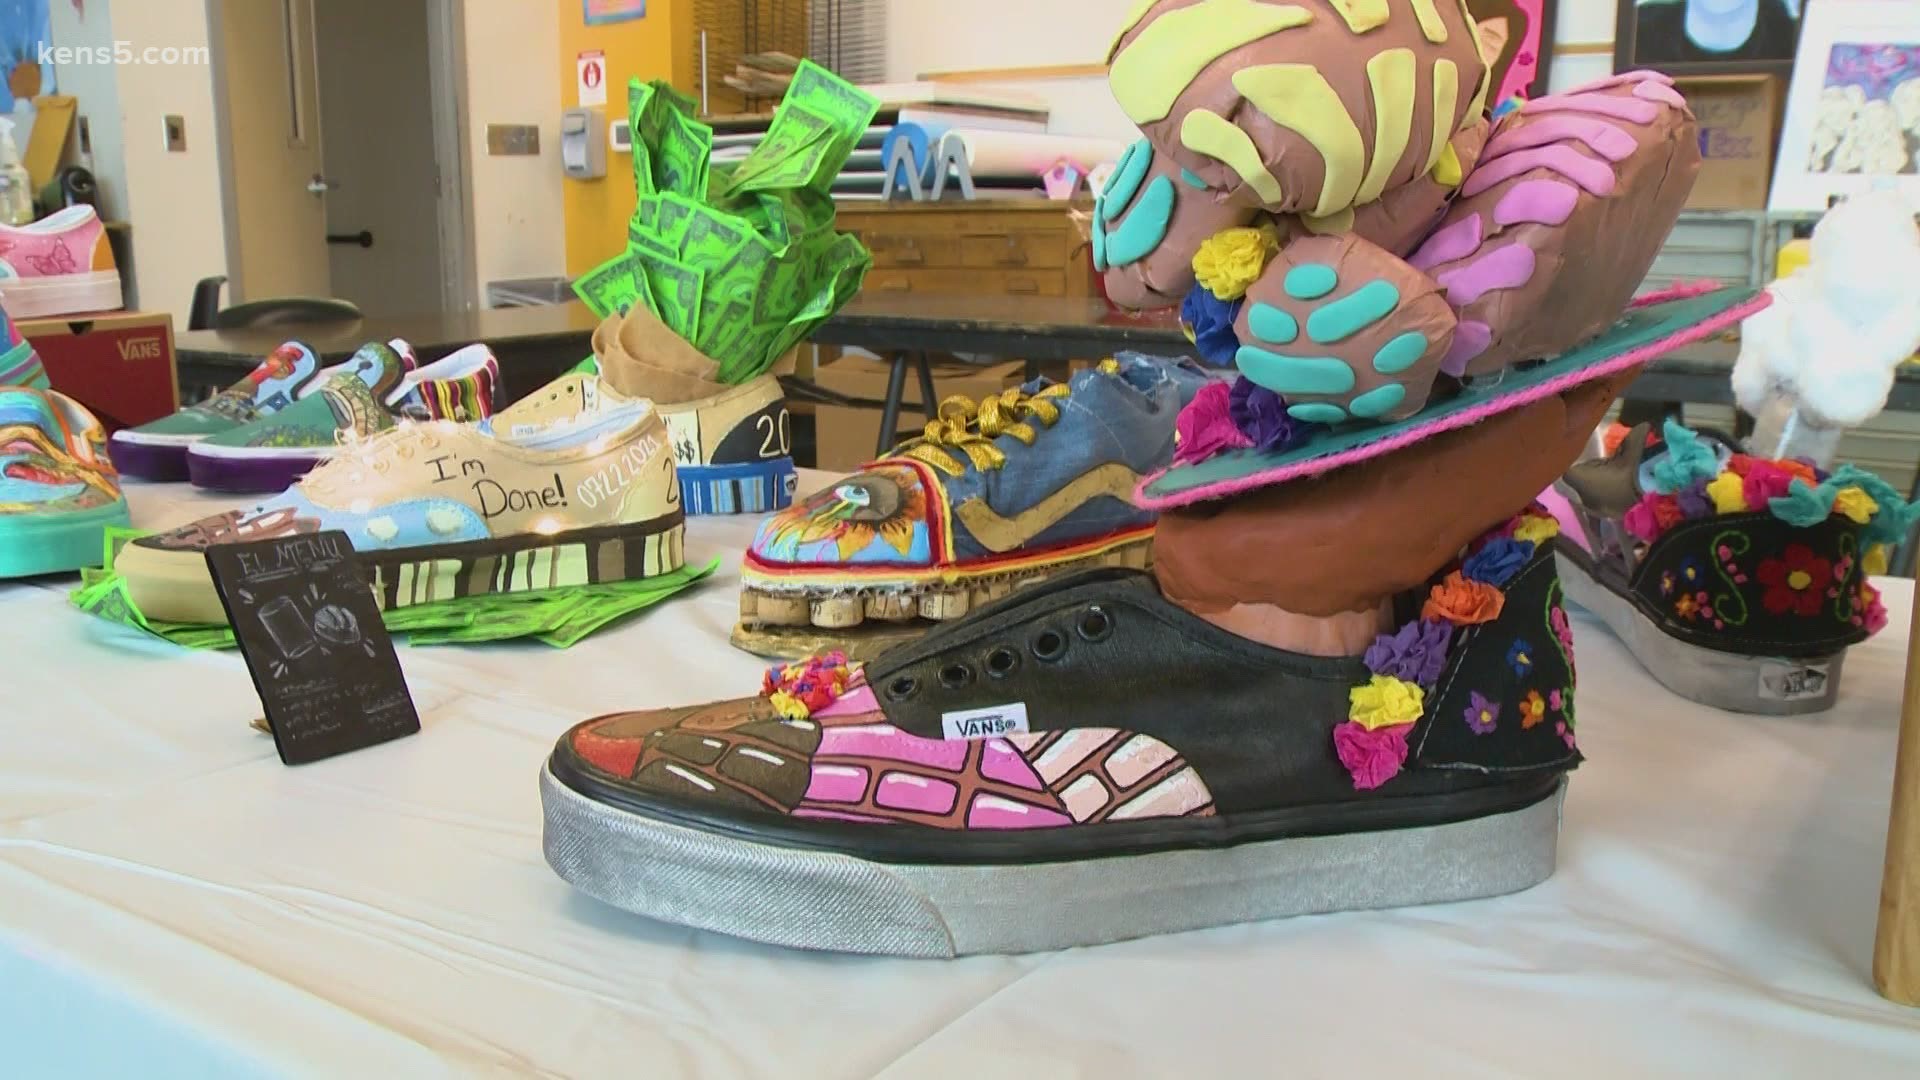 Edison art students win $15,000 prize for the school after designing custom San Antonio-themed Vans.